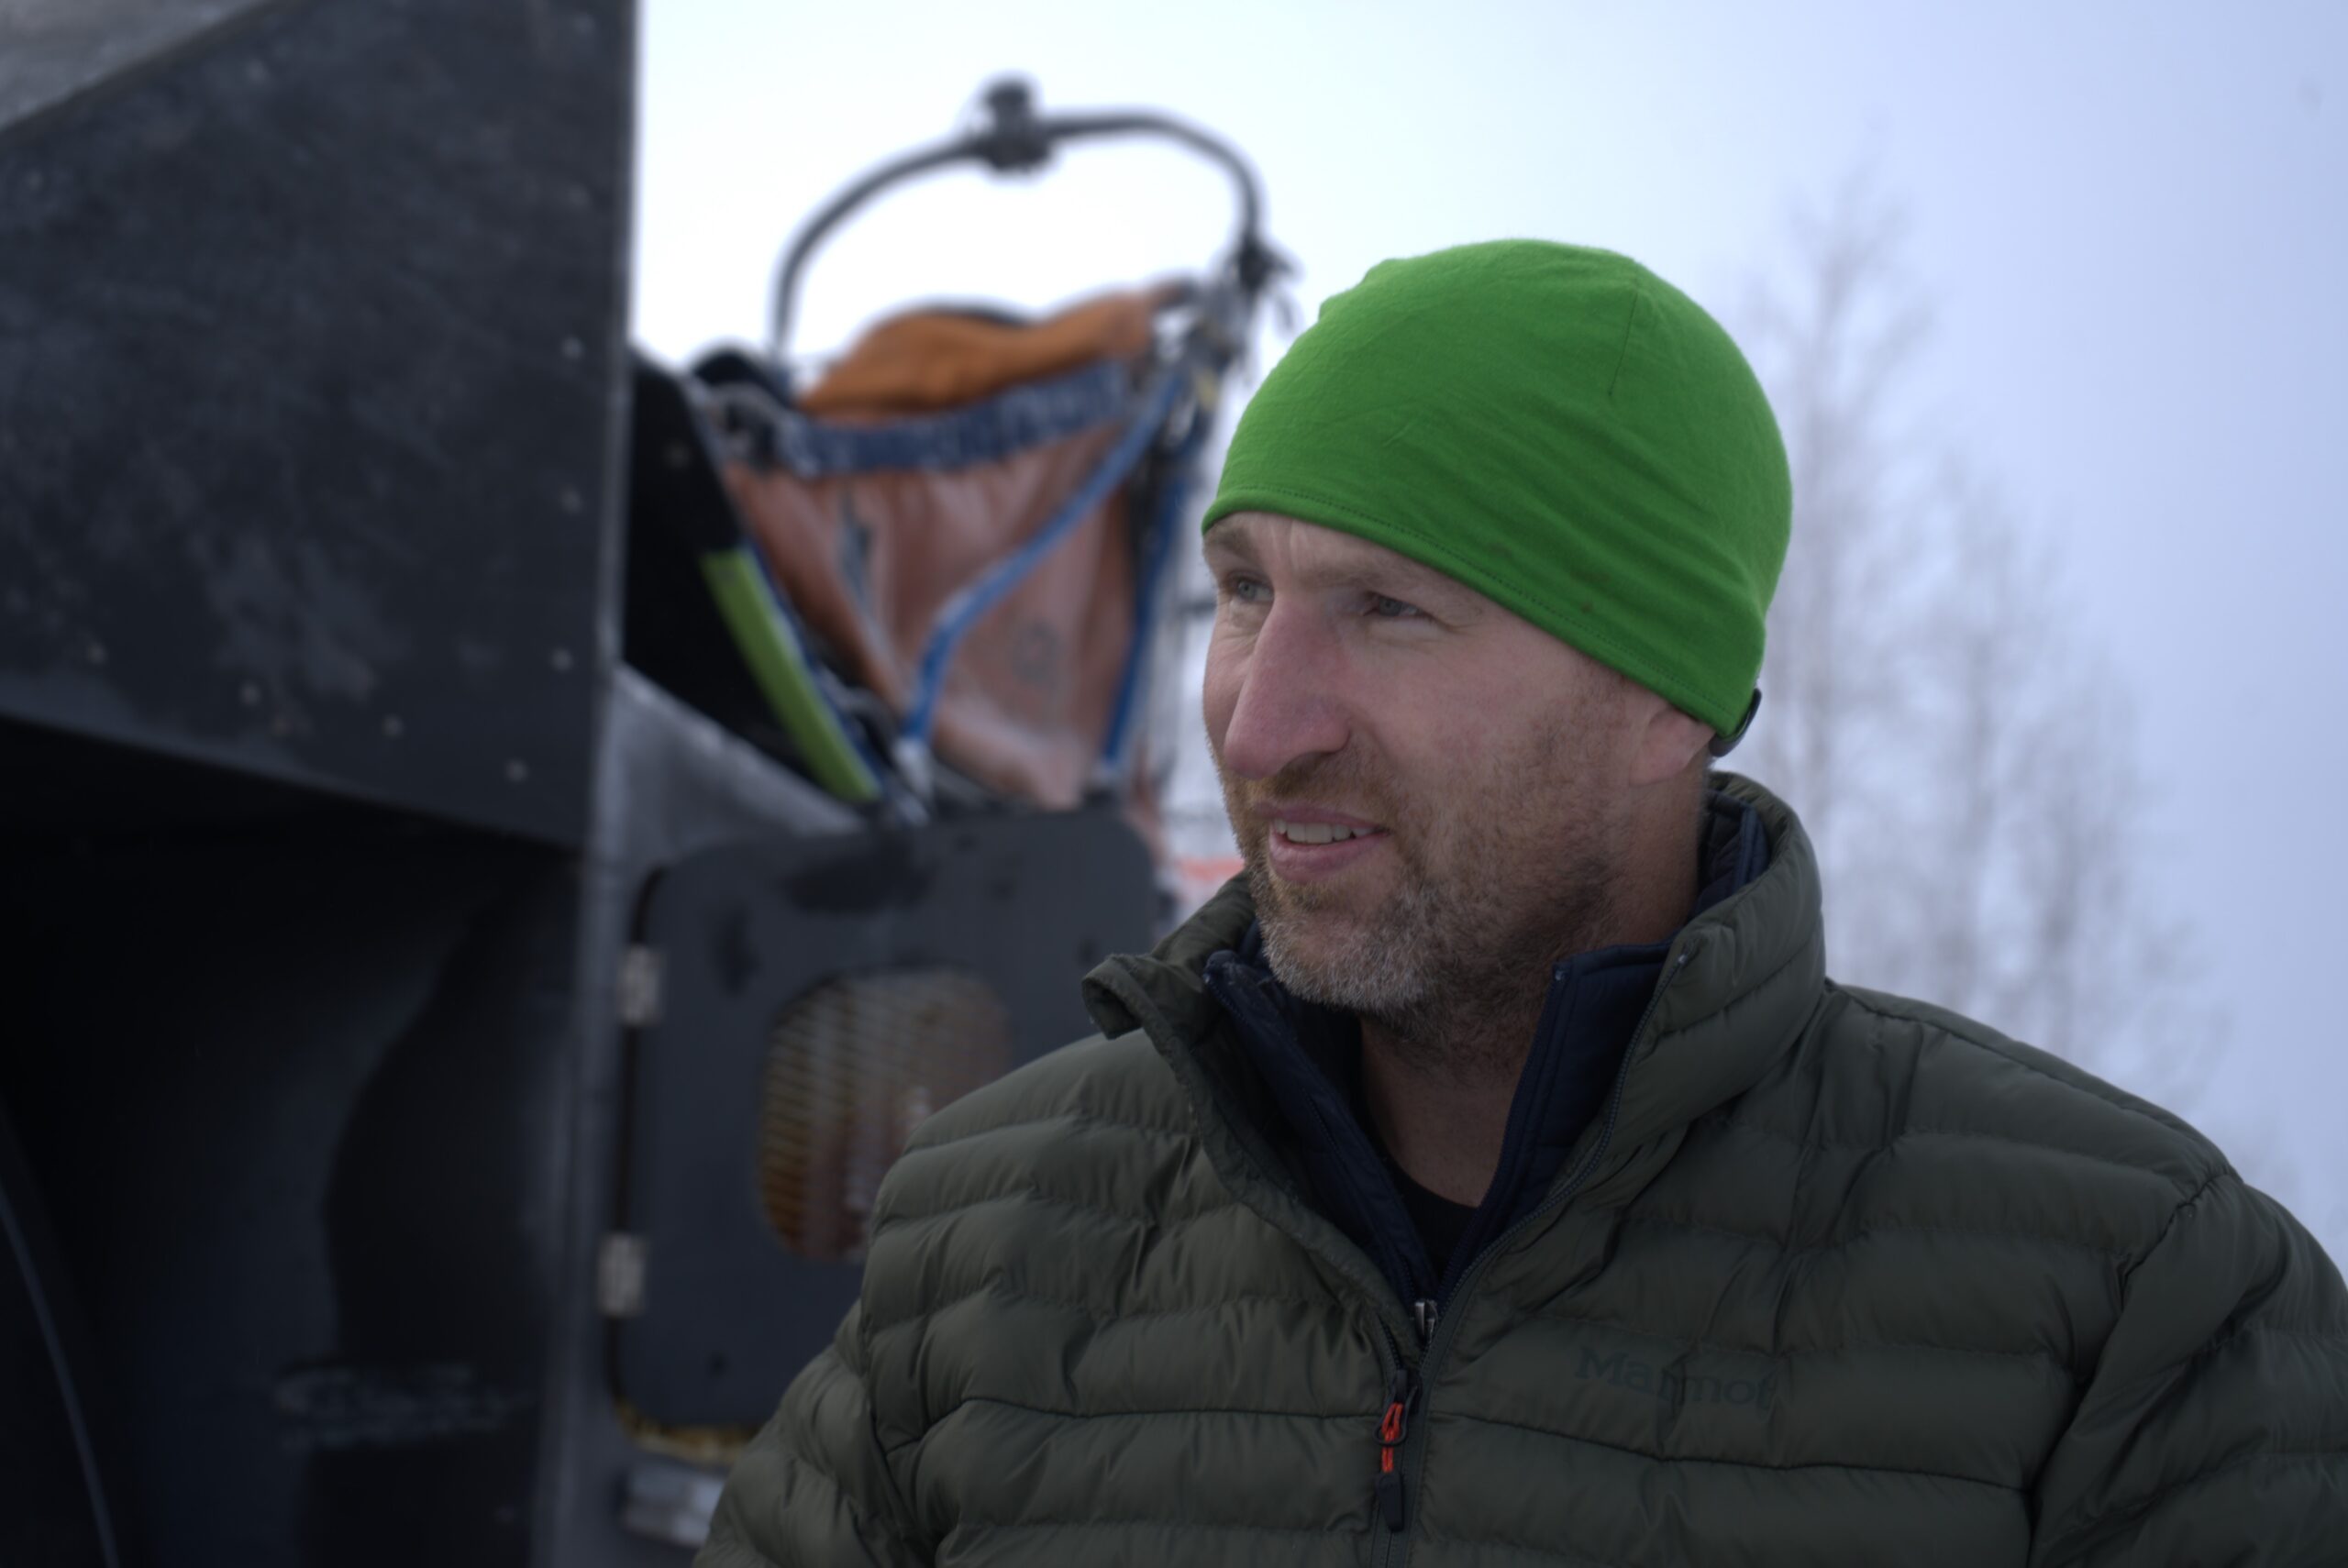 A man with a green hat and down jacket in front of a gog sled strapped to teh roof of a truck